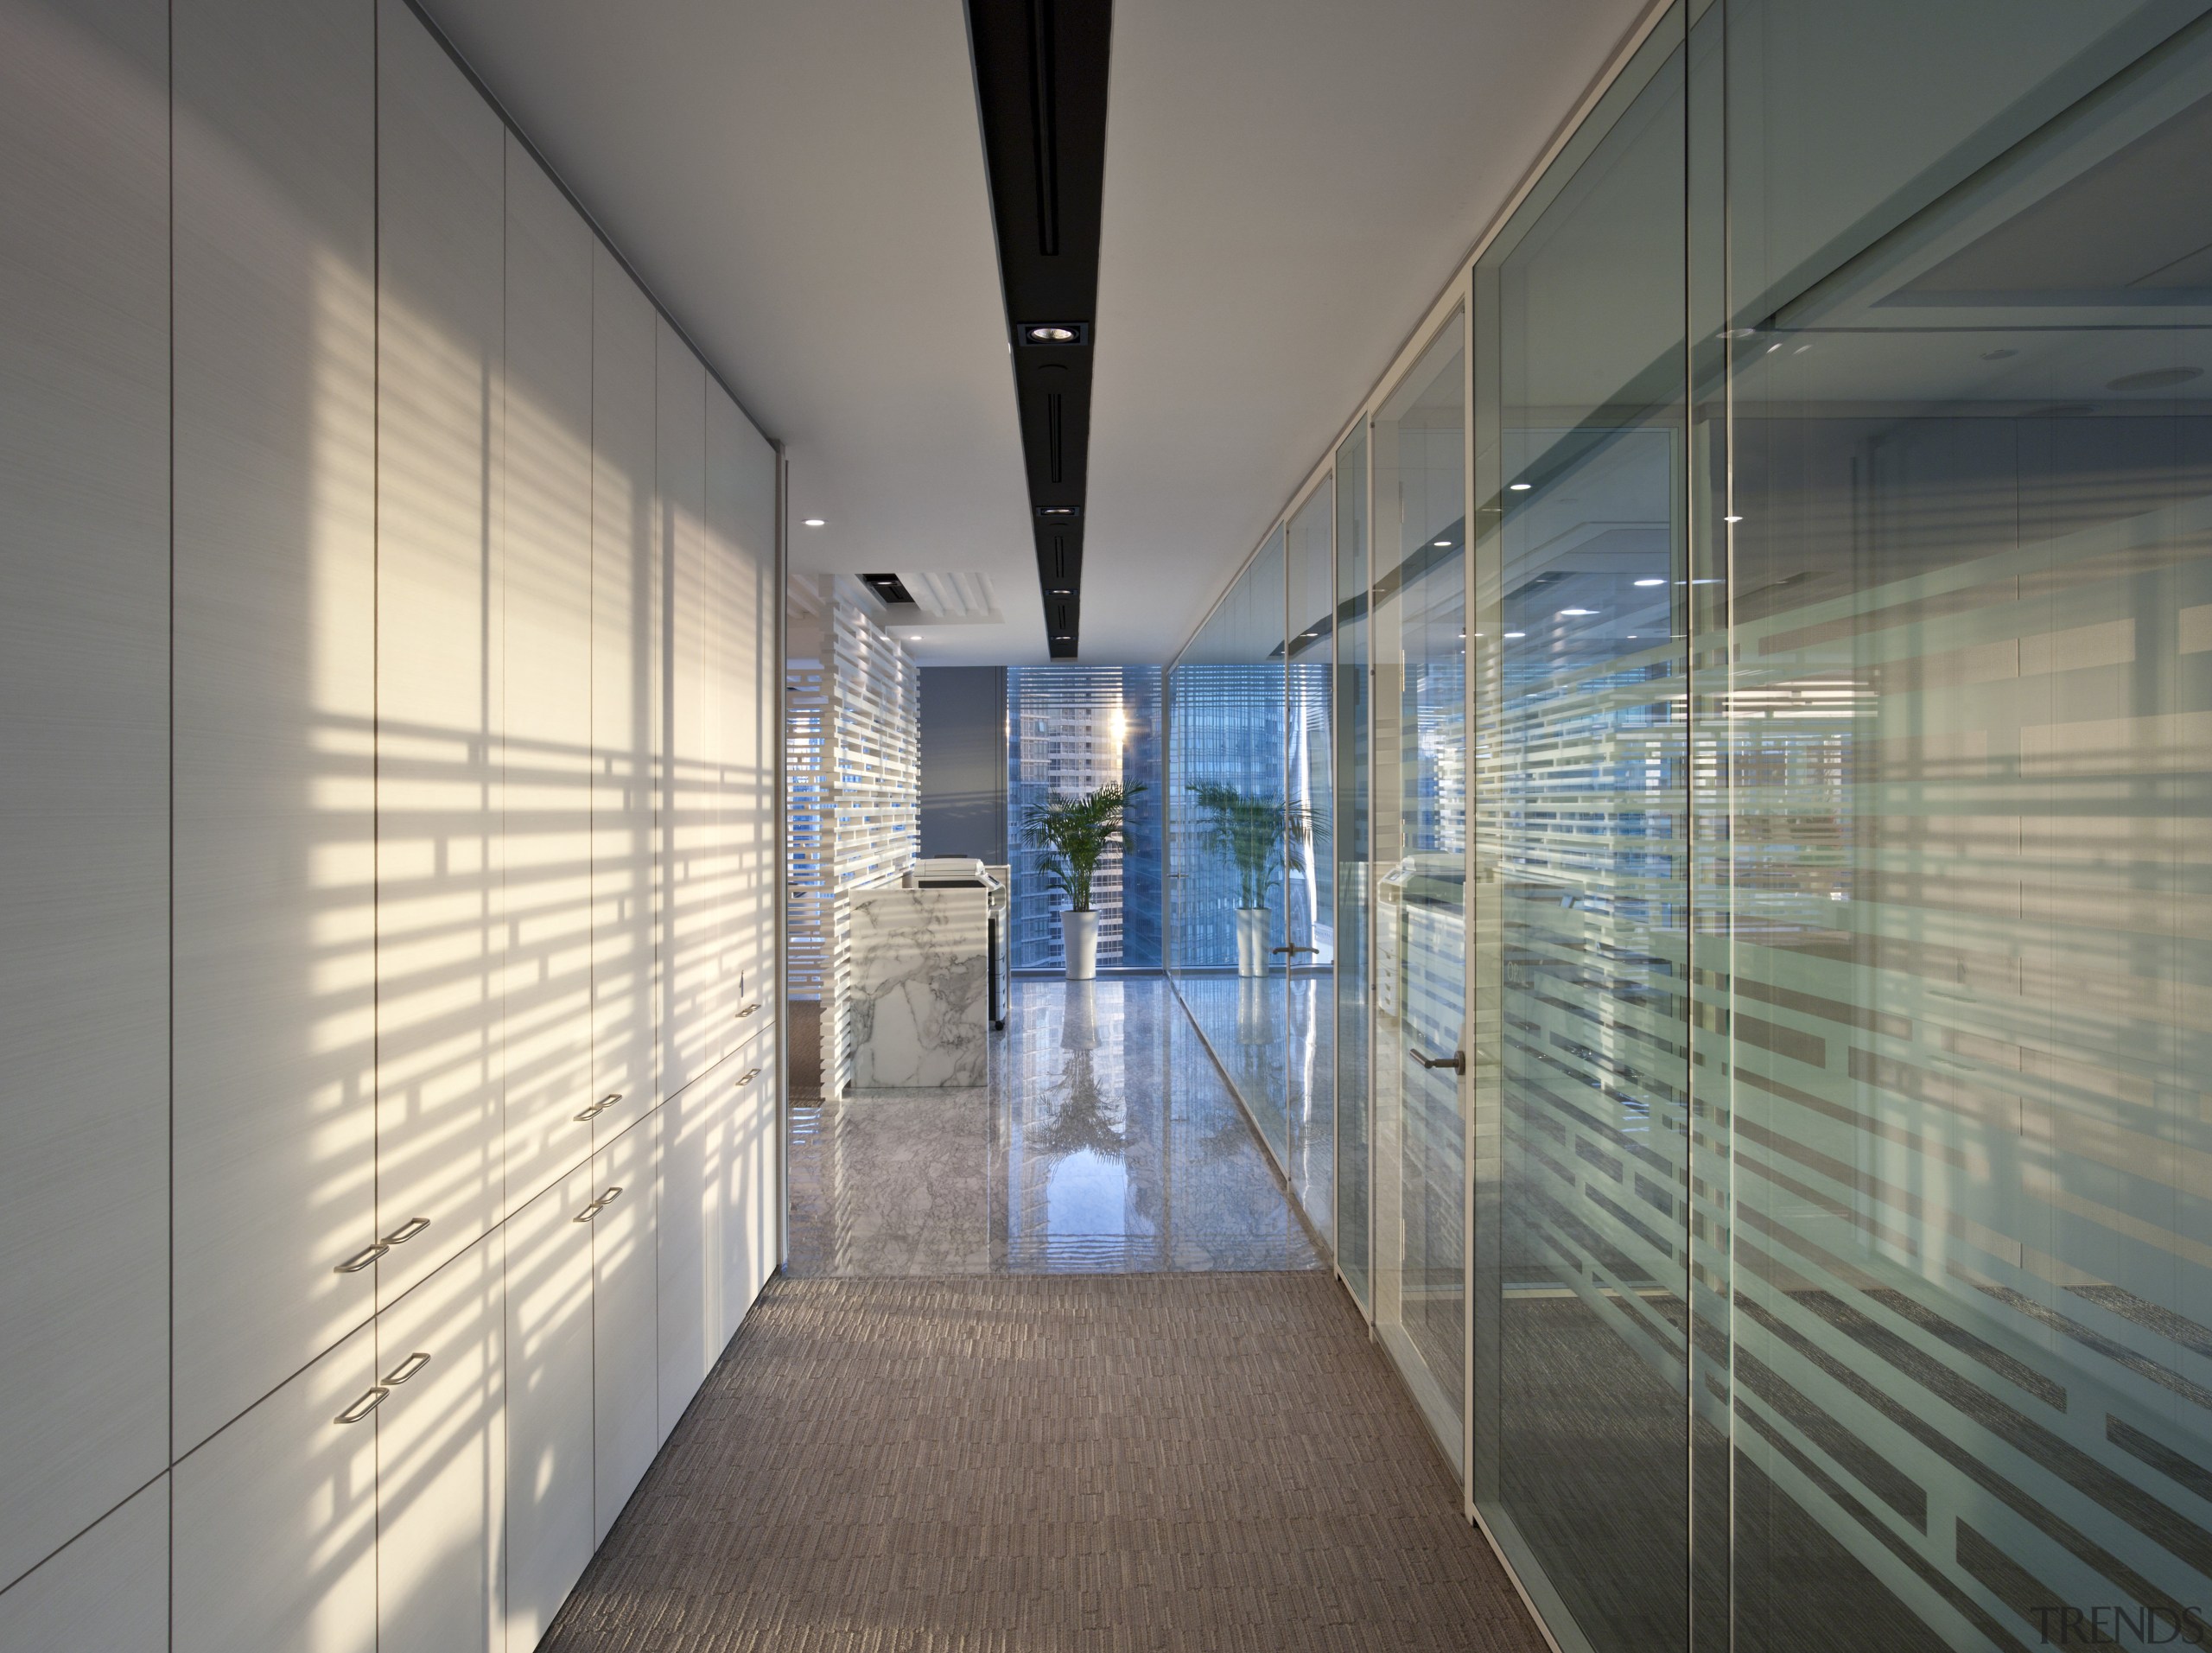 A simple corridor behind the reception area of architecture, ceiling, daylighting, glass, interior design, lobby, real estate, gray